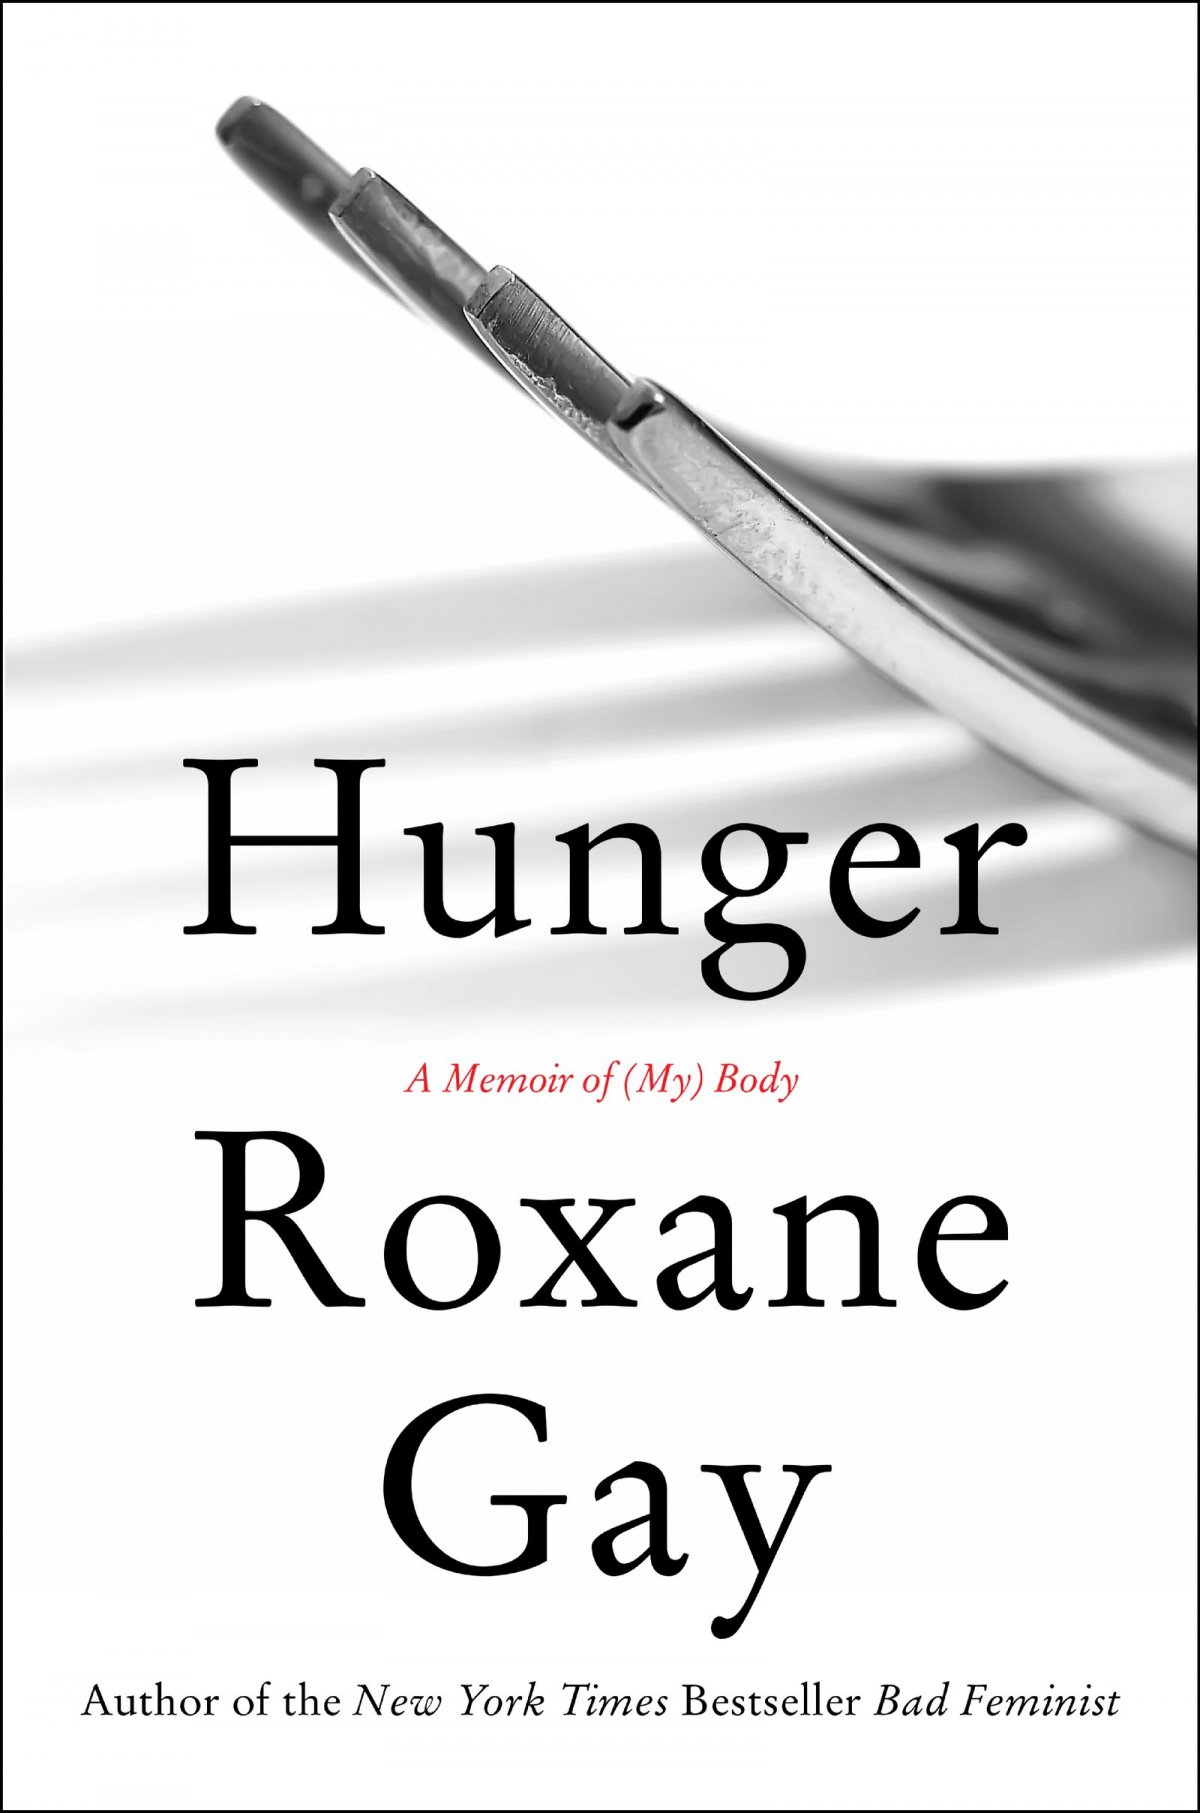 A Review of “Hunger” by Roxane Gay